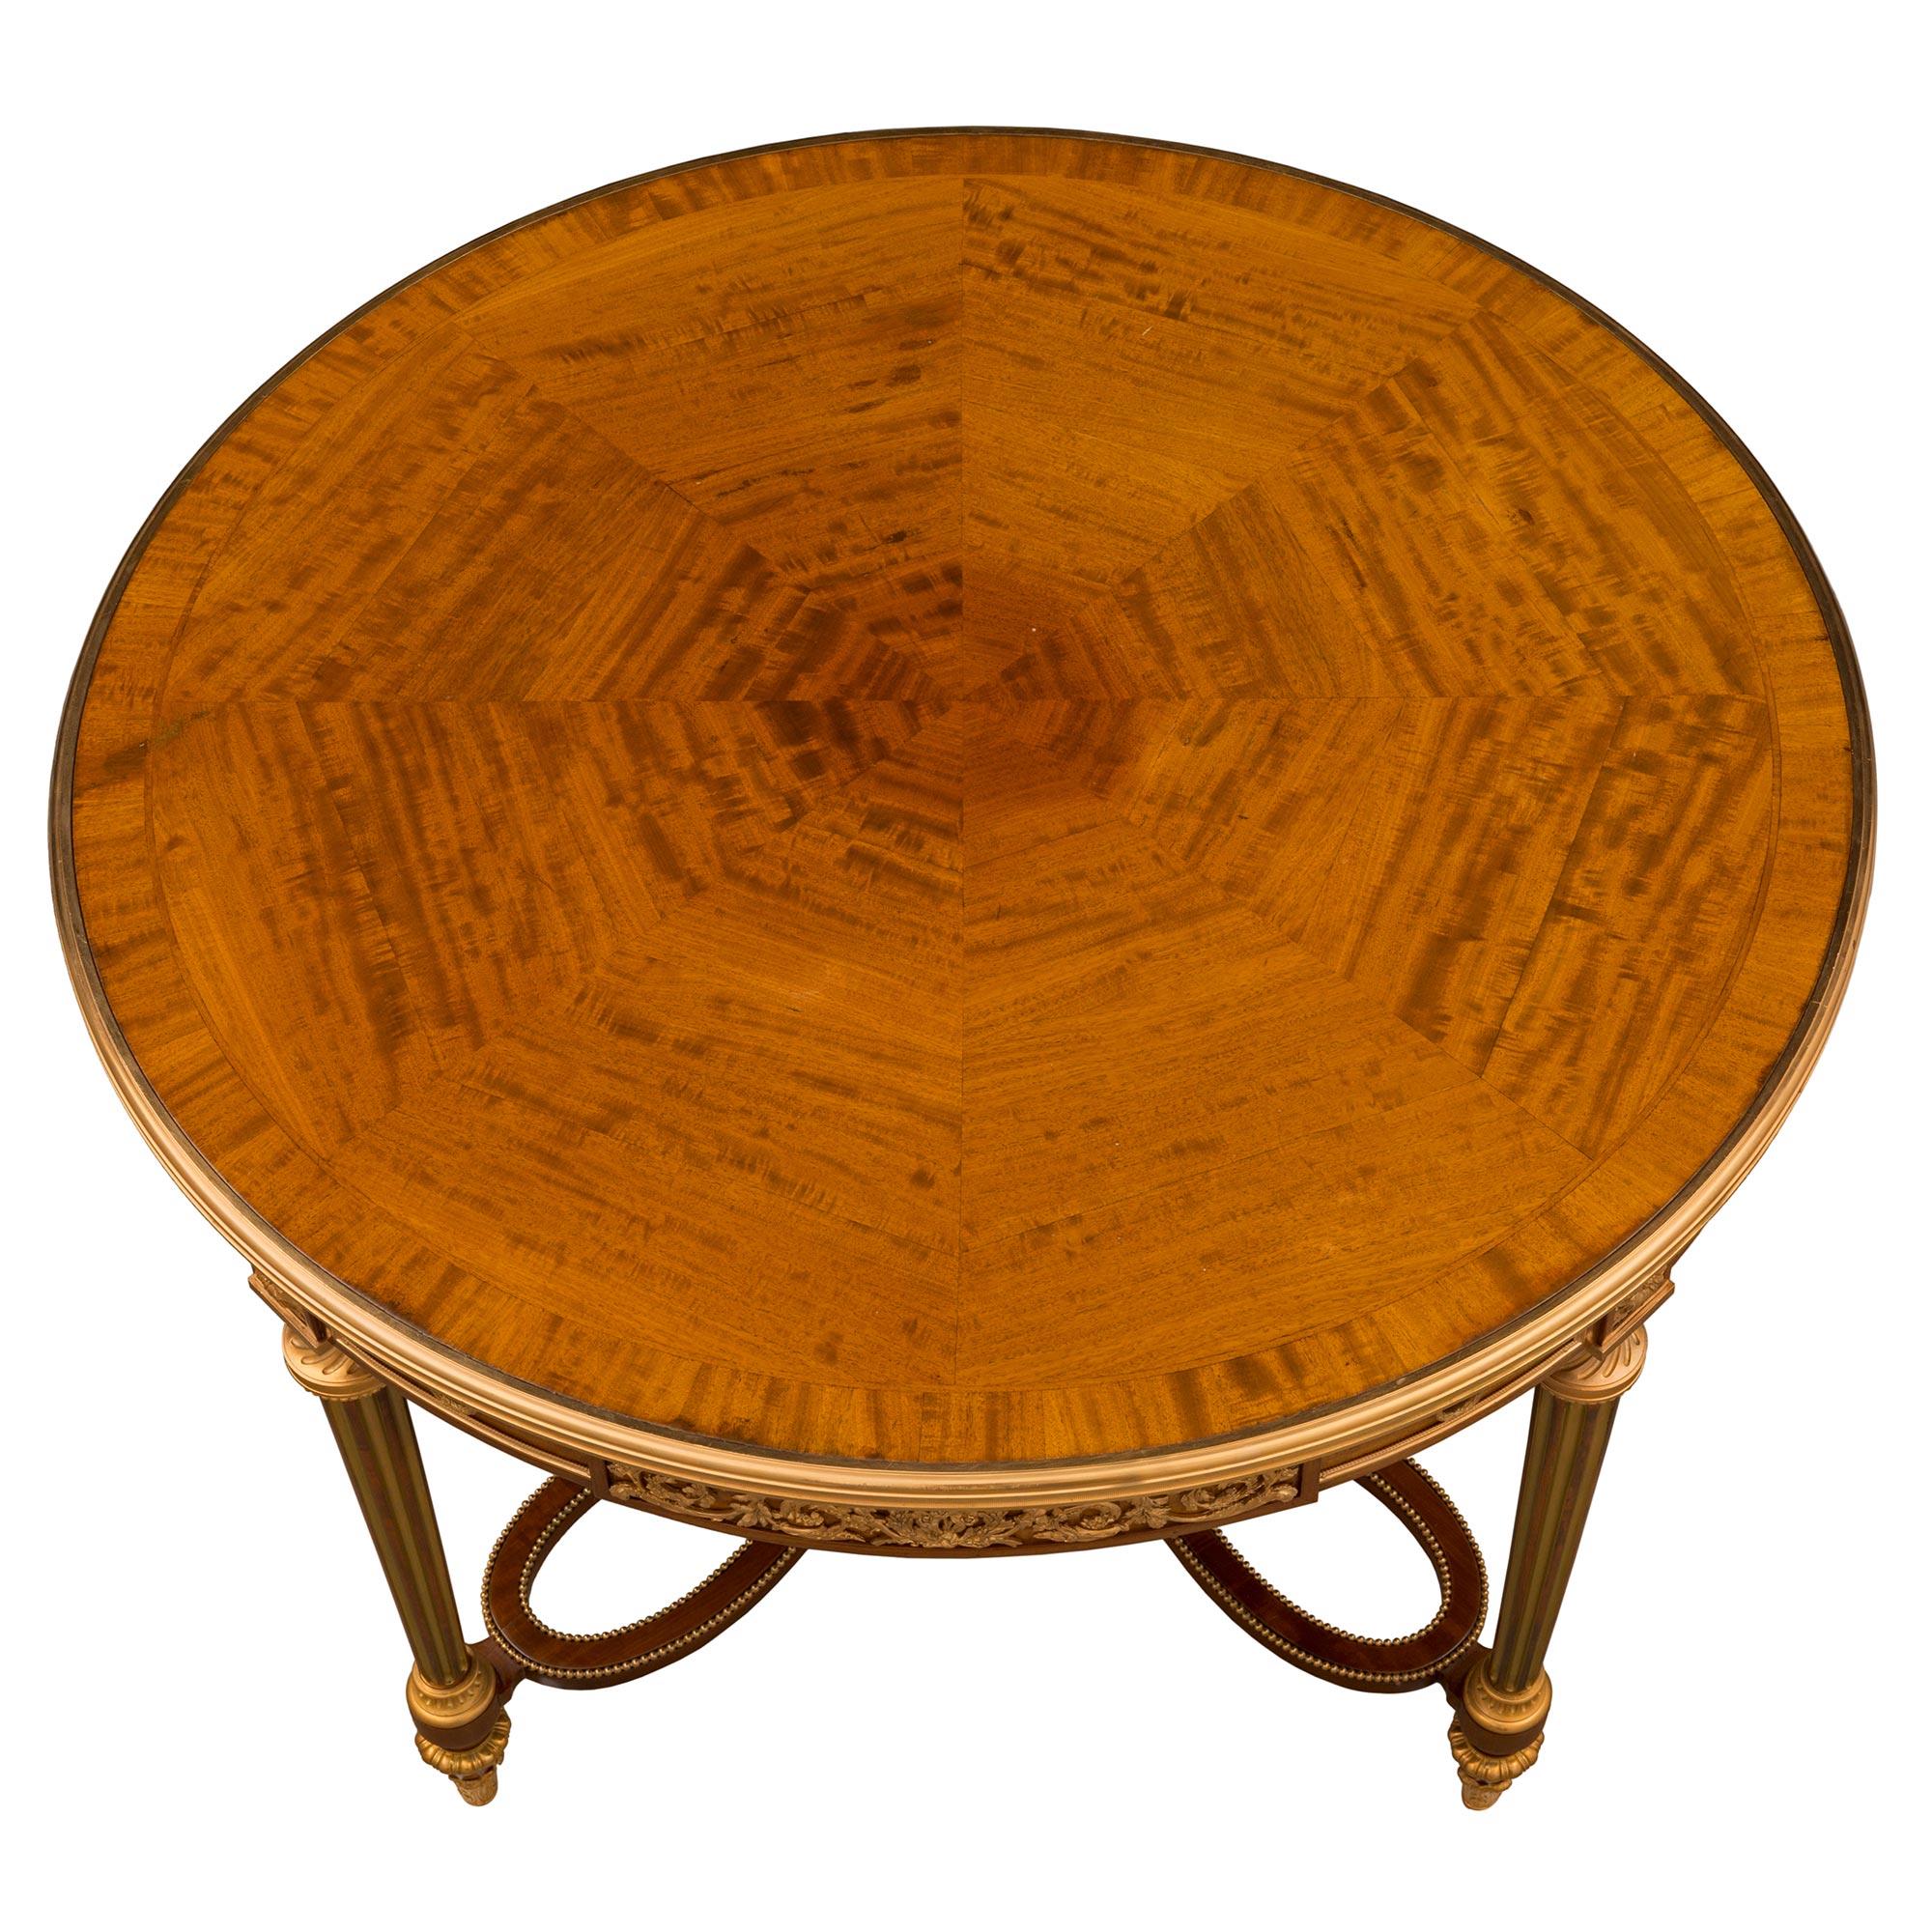 A stunning and very high quality French 19th century Louis XVI st. Mahogany, Satinwood, and ormolu center table attributed to Henry Dasson. The circular table is raised by delicate topie shaped feet with beautiful fitted foliate ormolu sabots and